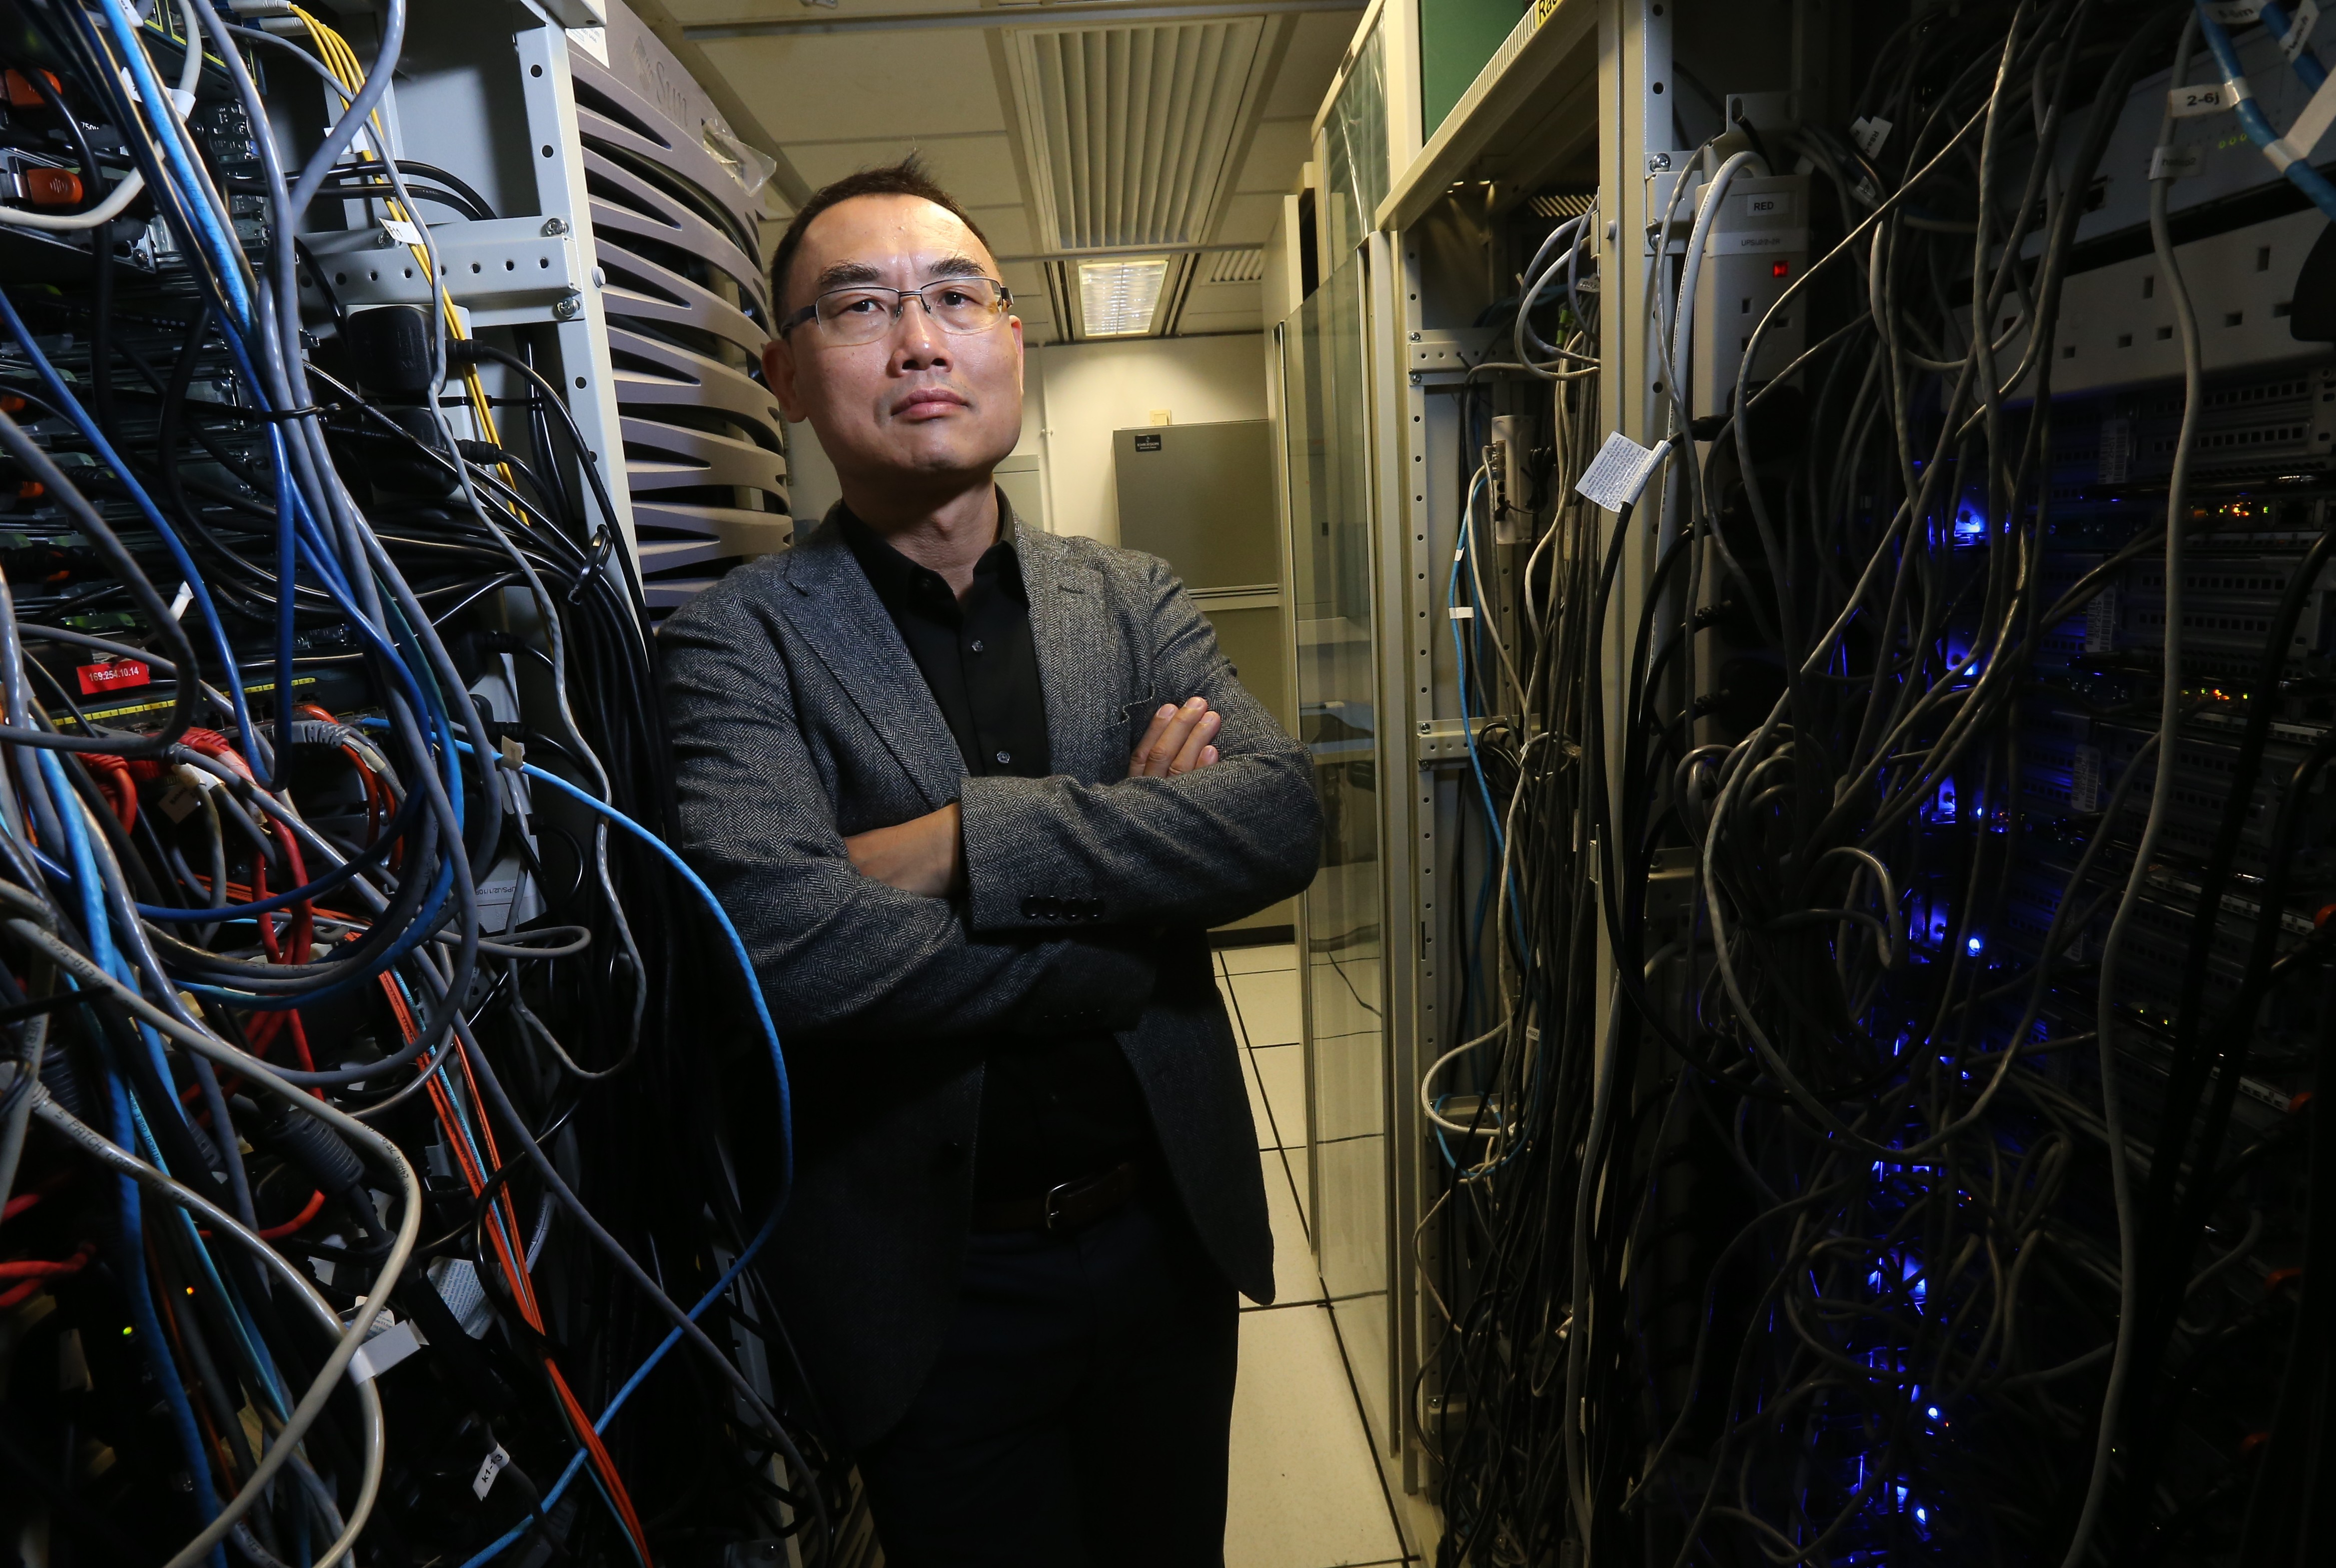 Yang Qiang, professor of artificial intelligence at the Hong Kong University of Science and Technology, discusses a partnership between HKUST and WeChat to grant university researchers access to data generated by the mobile app’s users. Photo: Dickson Lee